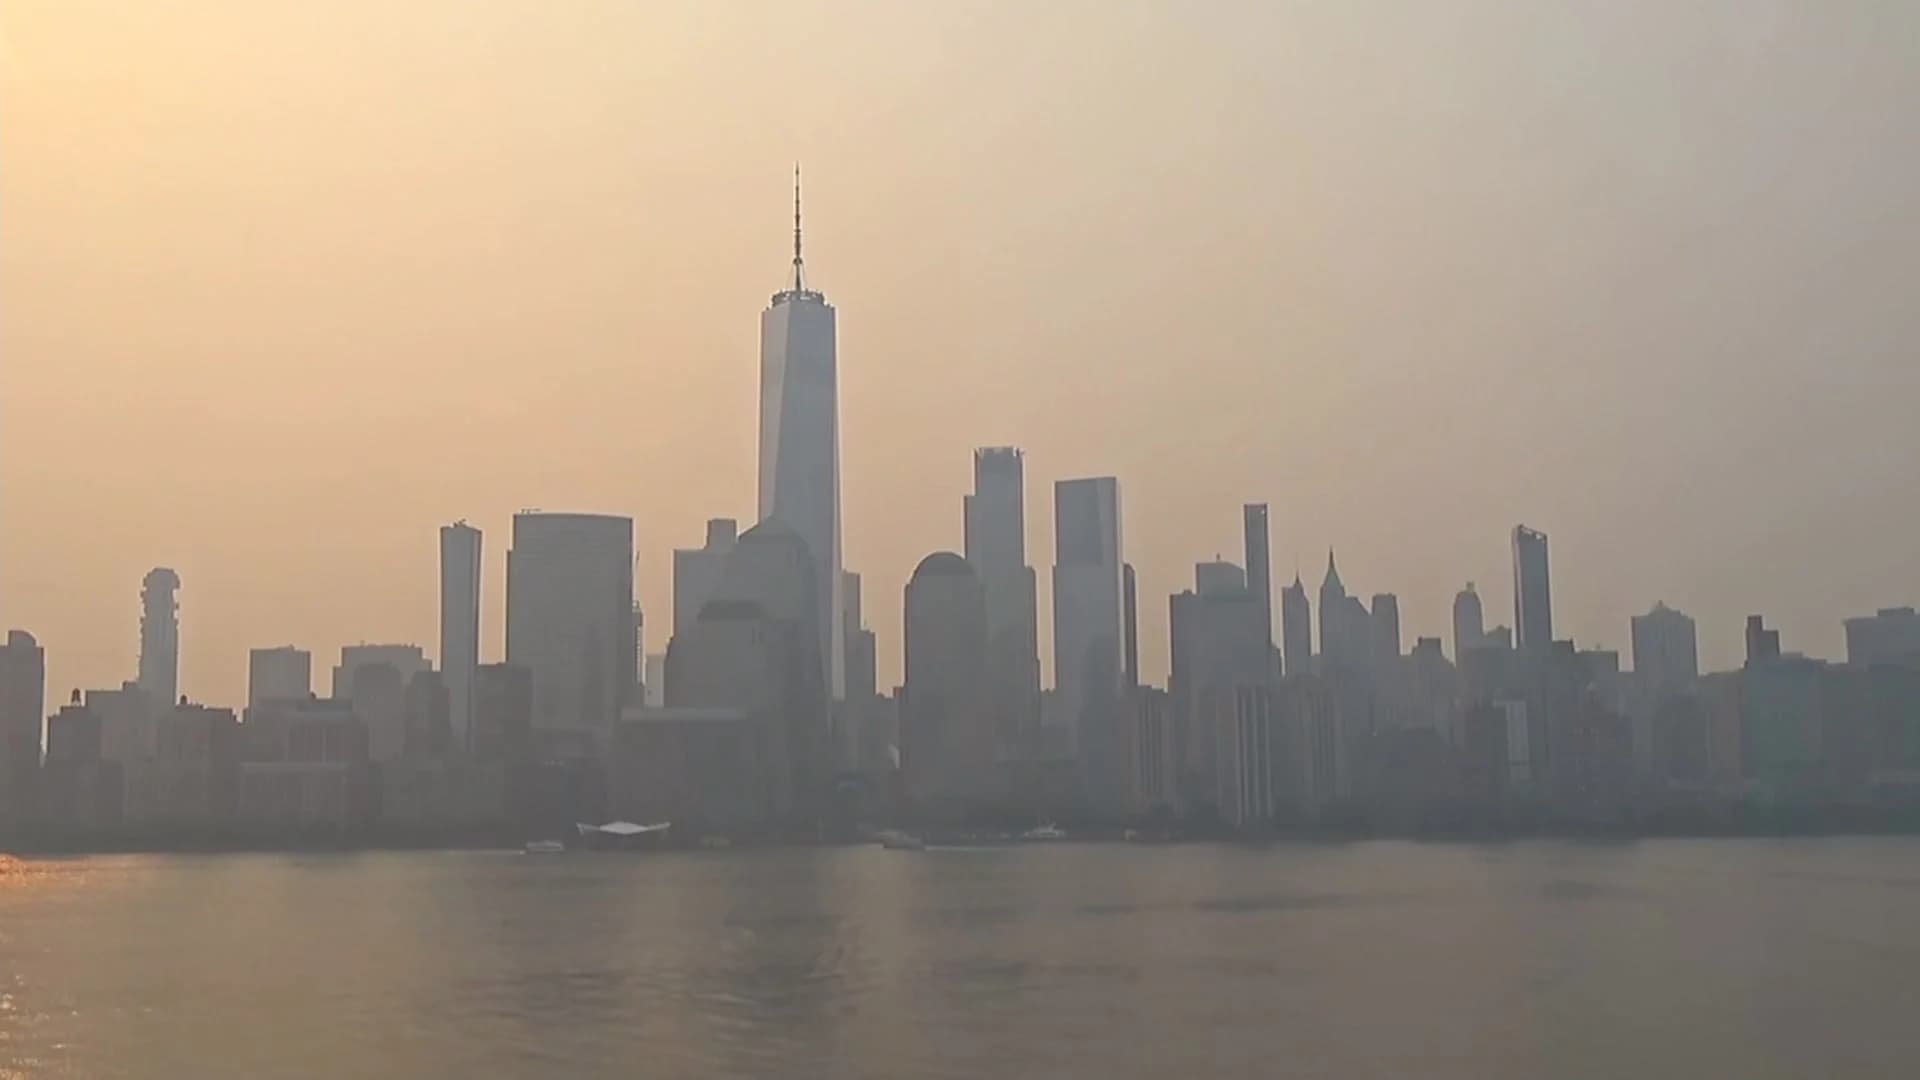 Hazy skies in New Jersey as air quality remains unhealthy. Here are some tips to protect yourself